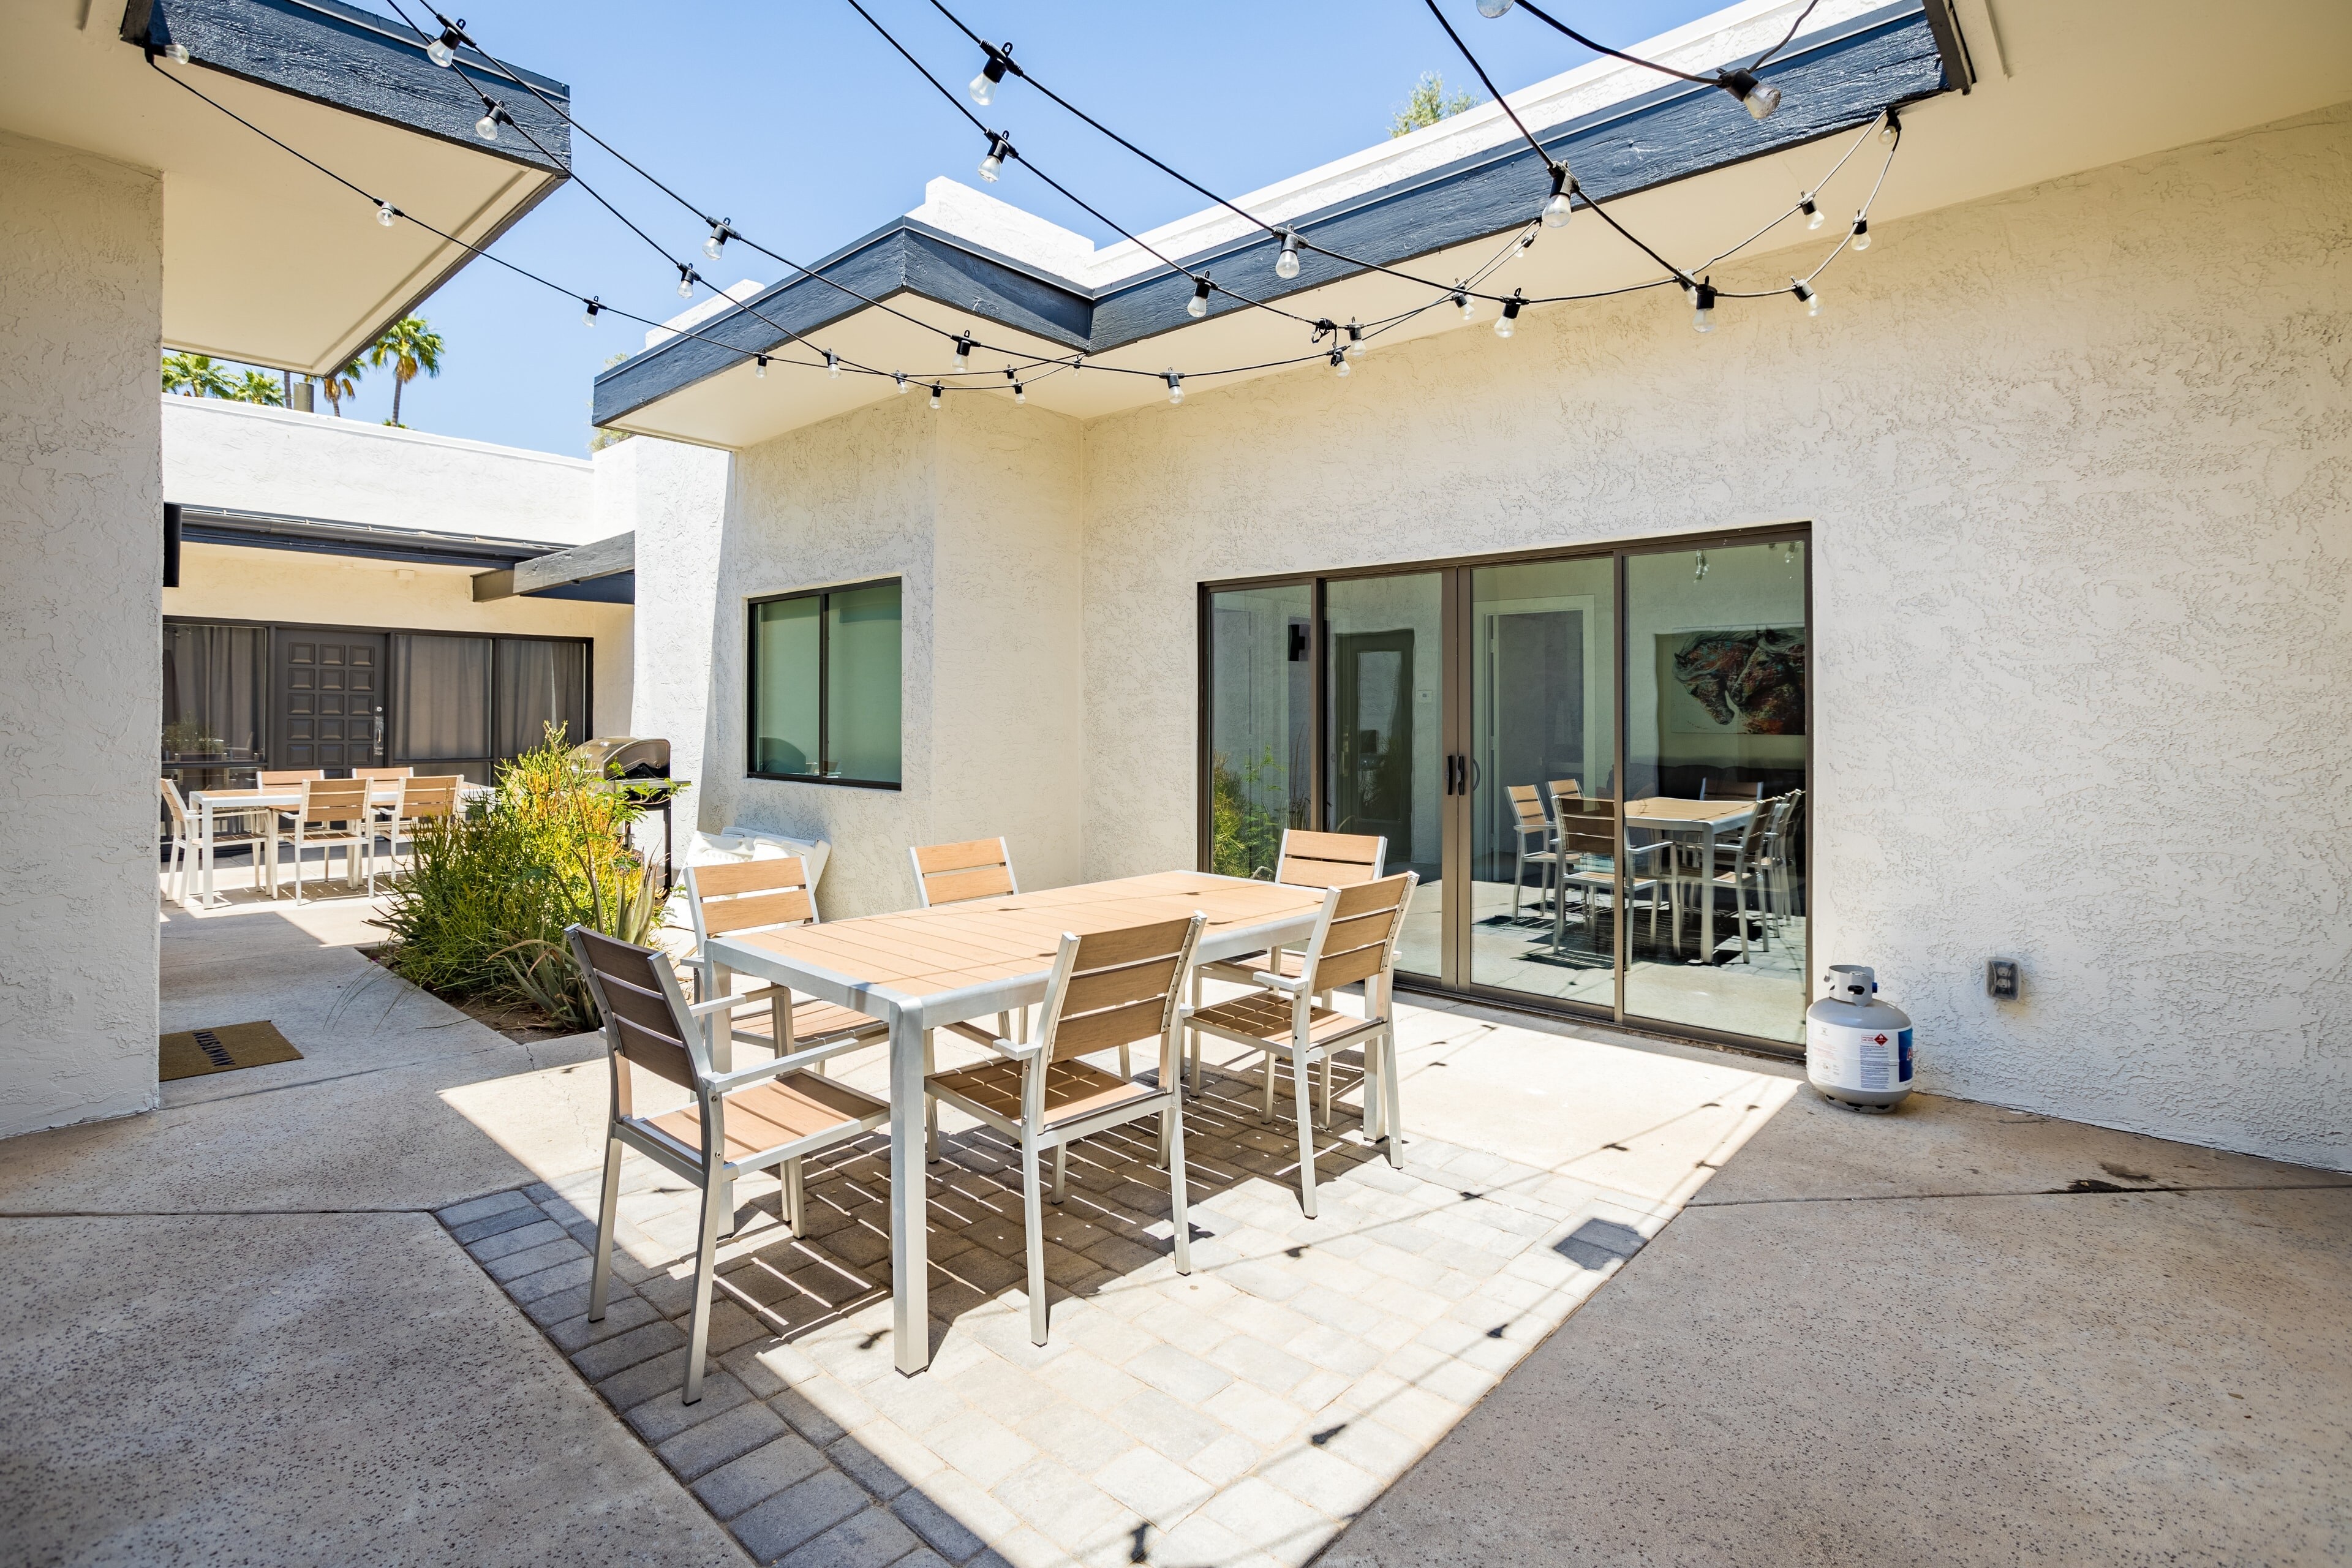 Luna and Stellar share a beautiful courtyard with al fresco dining areas, grilling features, and ambient lighting.